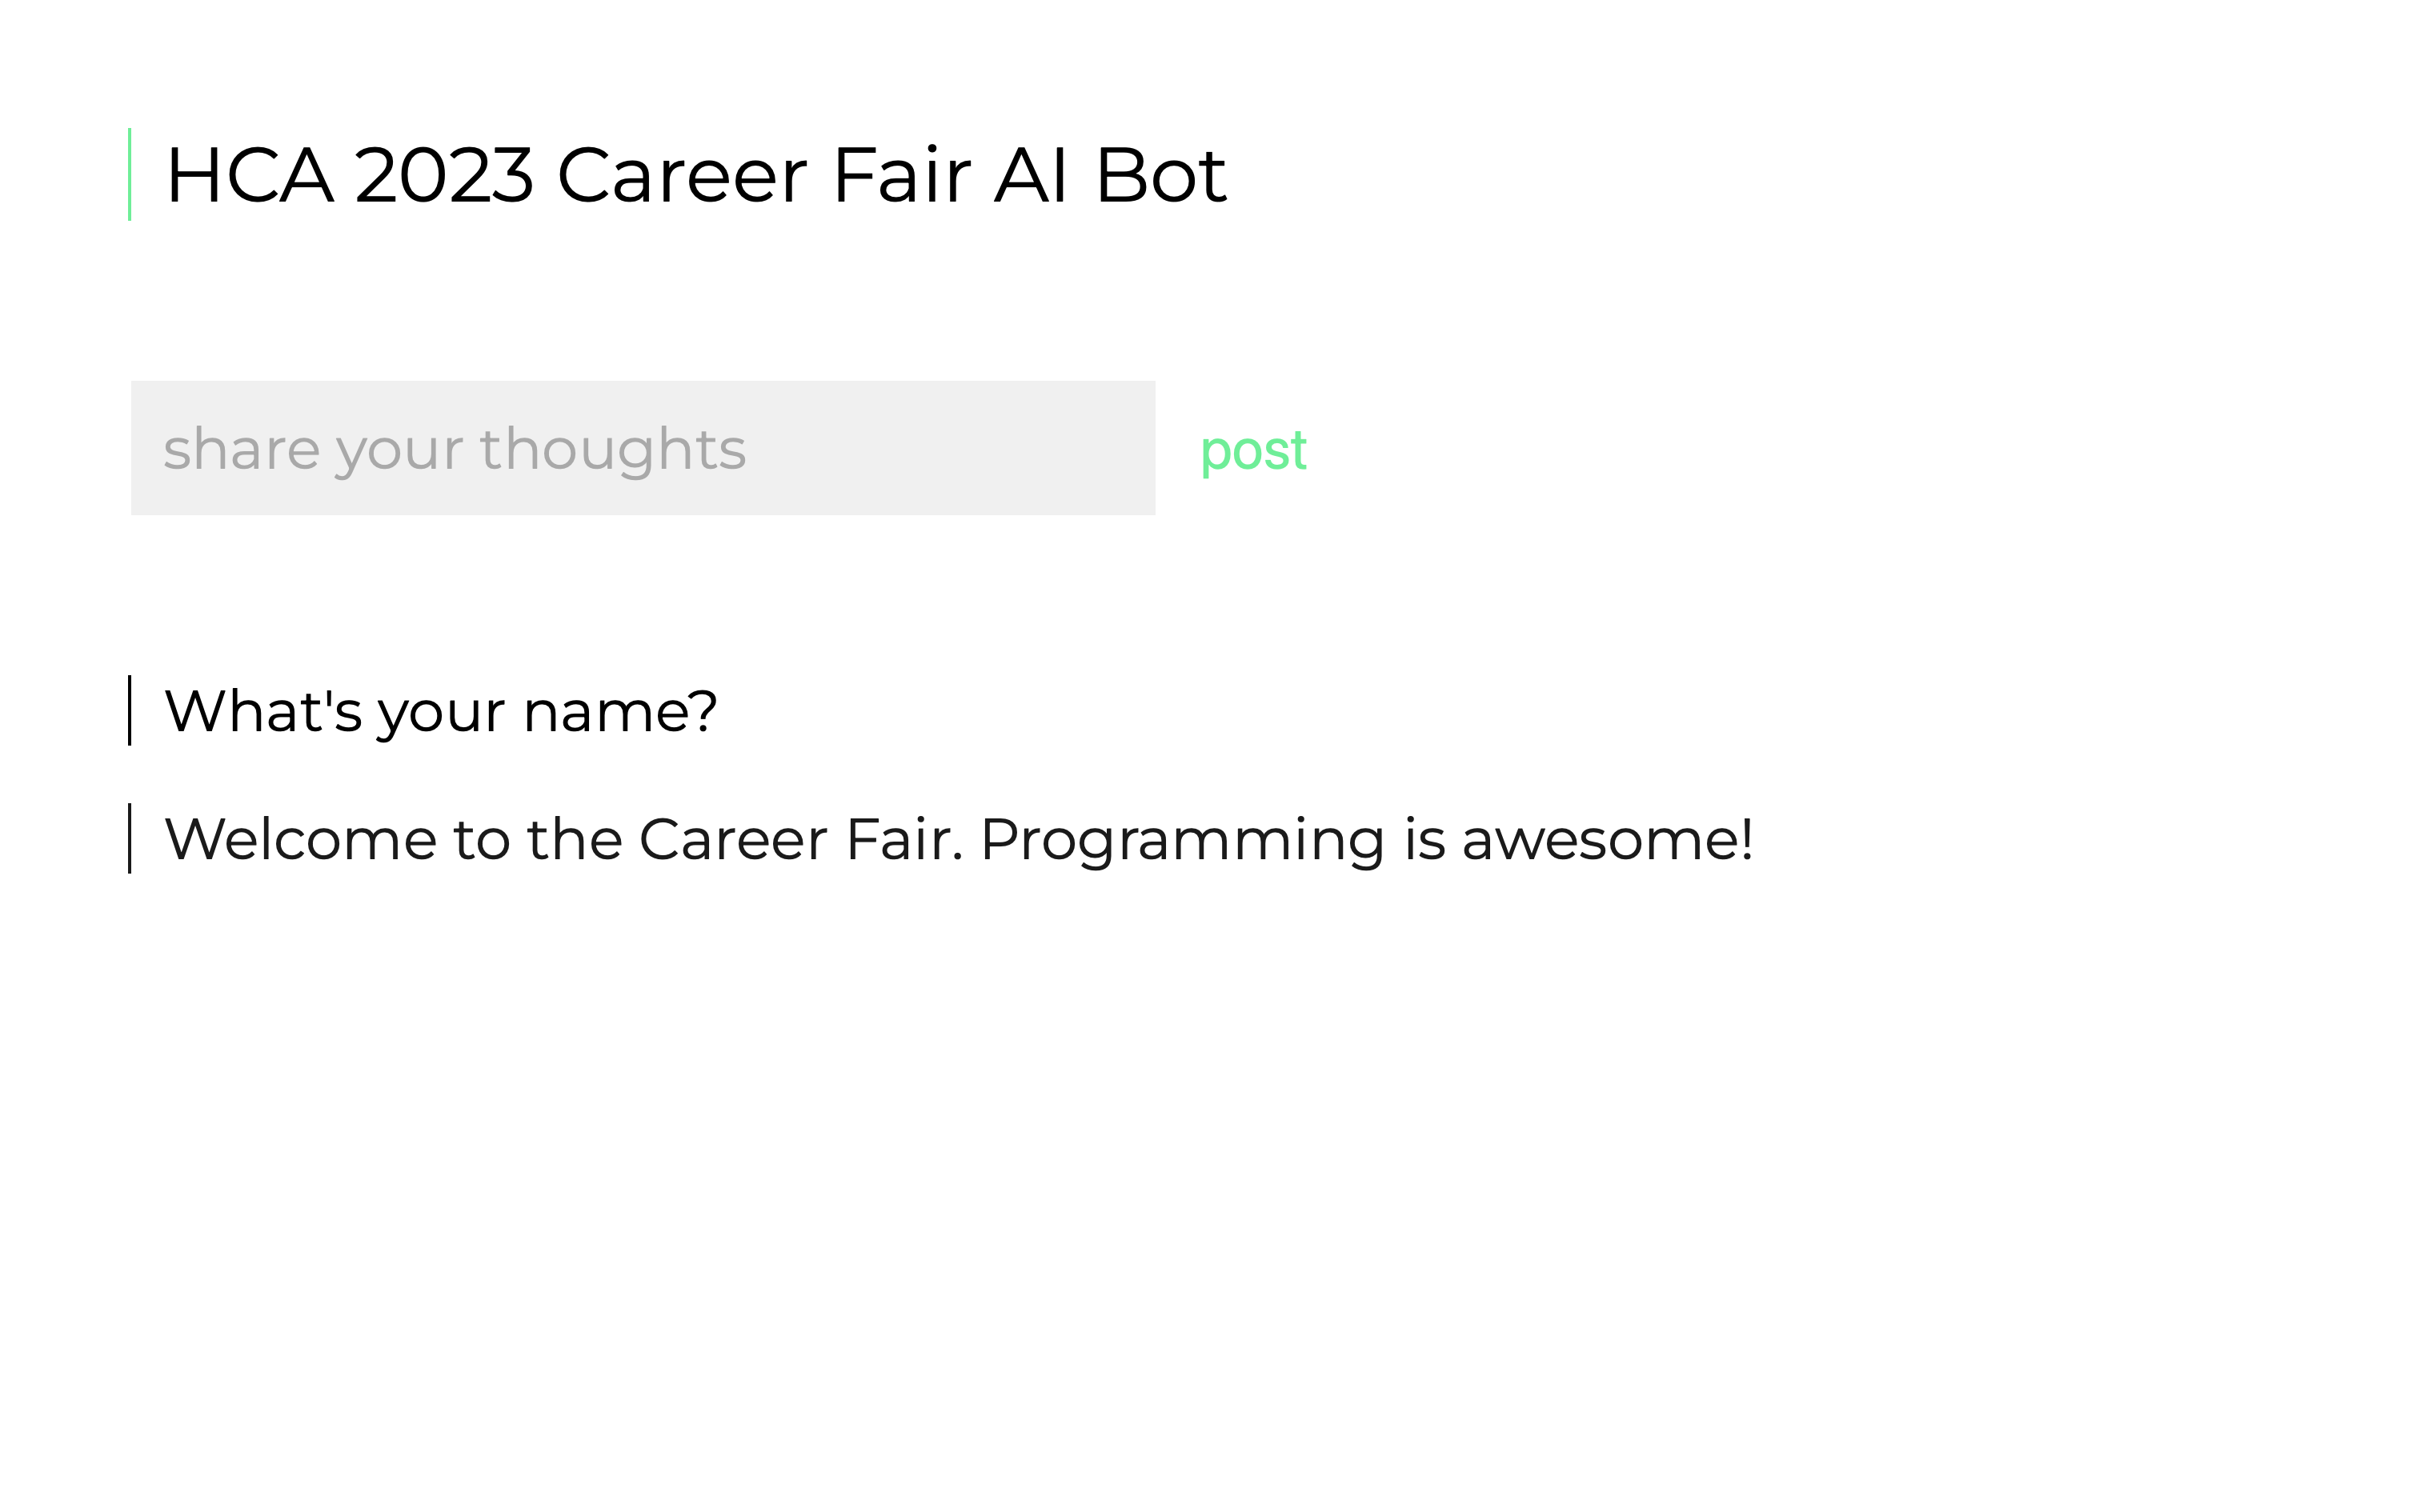 jQuery project. AI bot for HCA career fair. Asks students questions about their interest in software engineering. Uses submit to prepend comment to HTML as a li element. Logic uses a series of case statements to provide responses back.